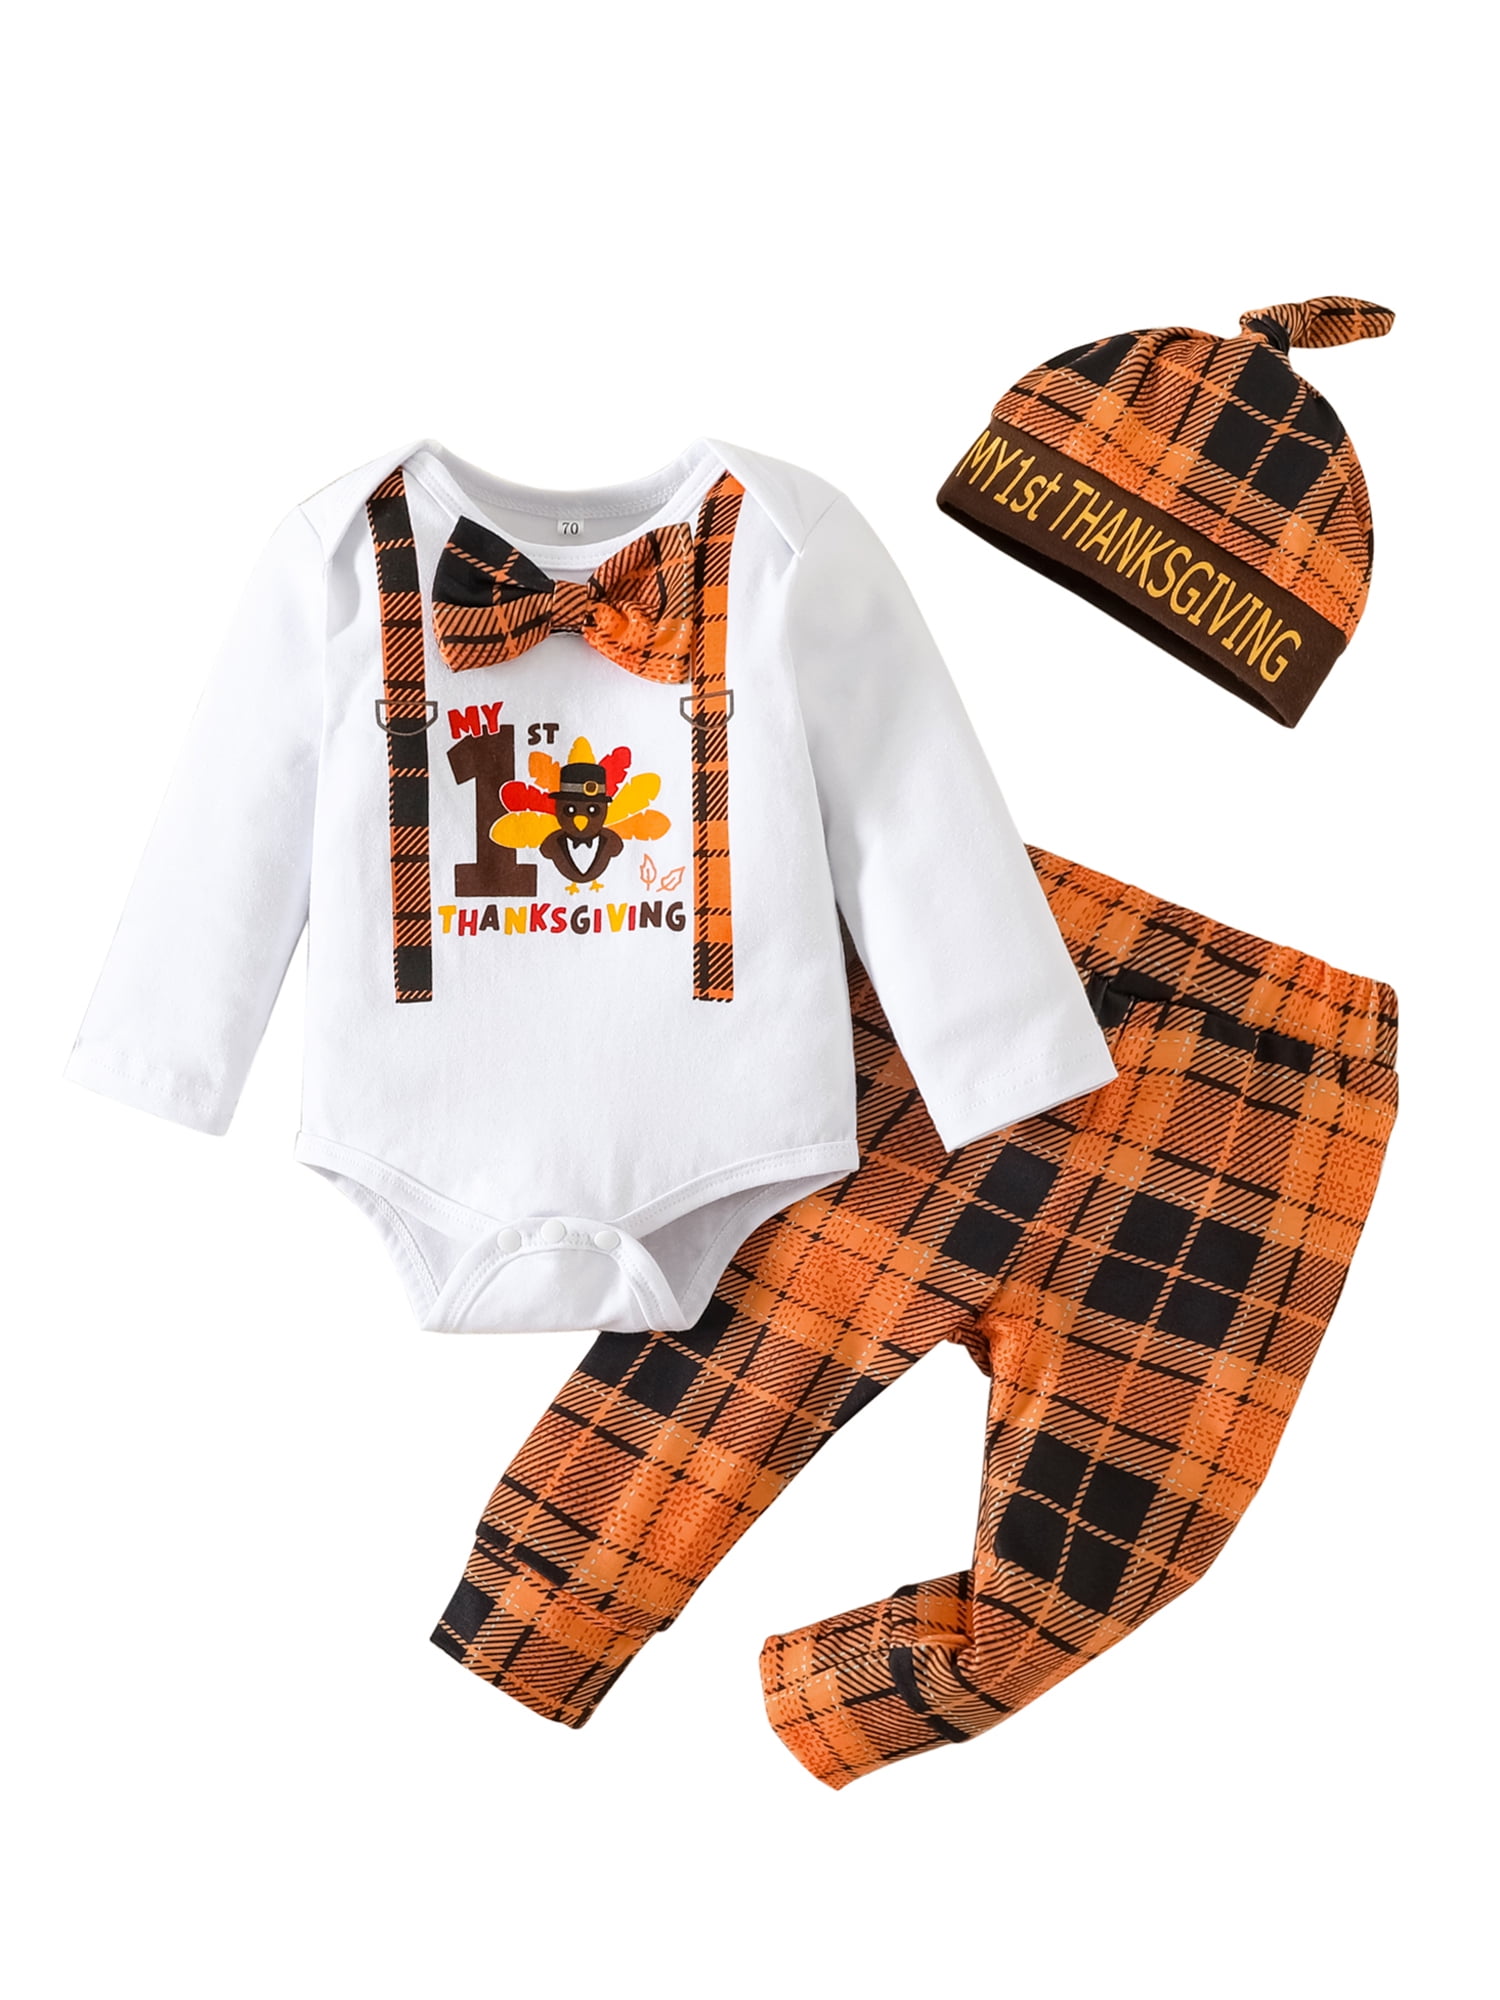 Kayotuas My First Thanksgiving Baby Girl Boy Outfit Long Sleeve Romper Bodysuit Tops Turkey Pants Headband Clothes Set